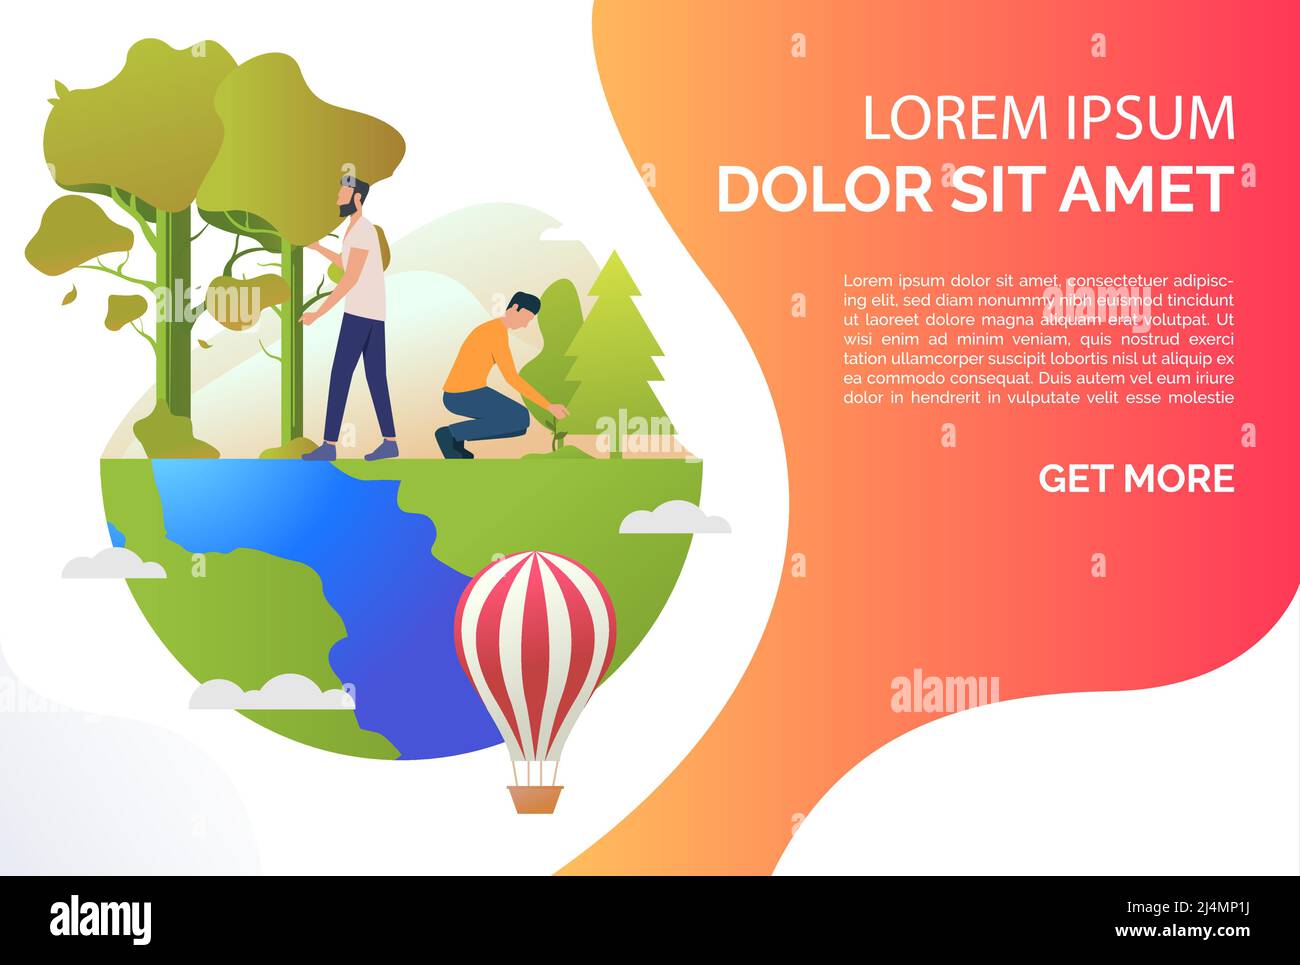 People growing plants, walking on Earth globe and sample text. Lifestyle, leisure, activity concept. Presentation slide template. Vector illustration Stock Vector